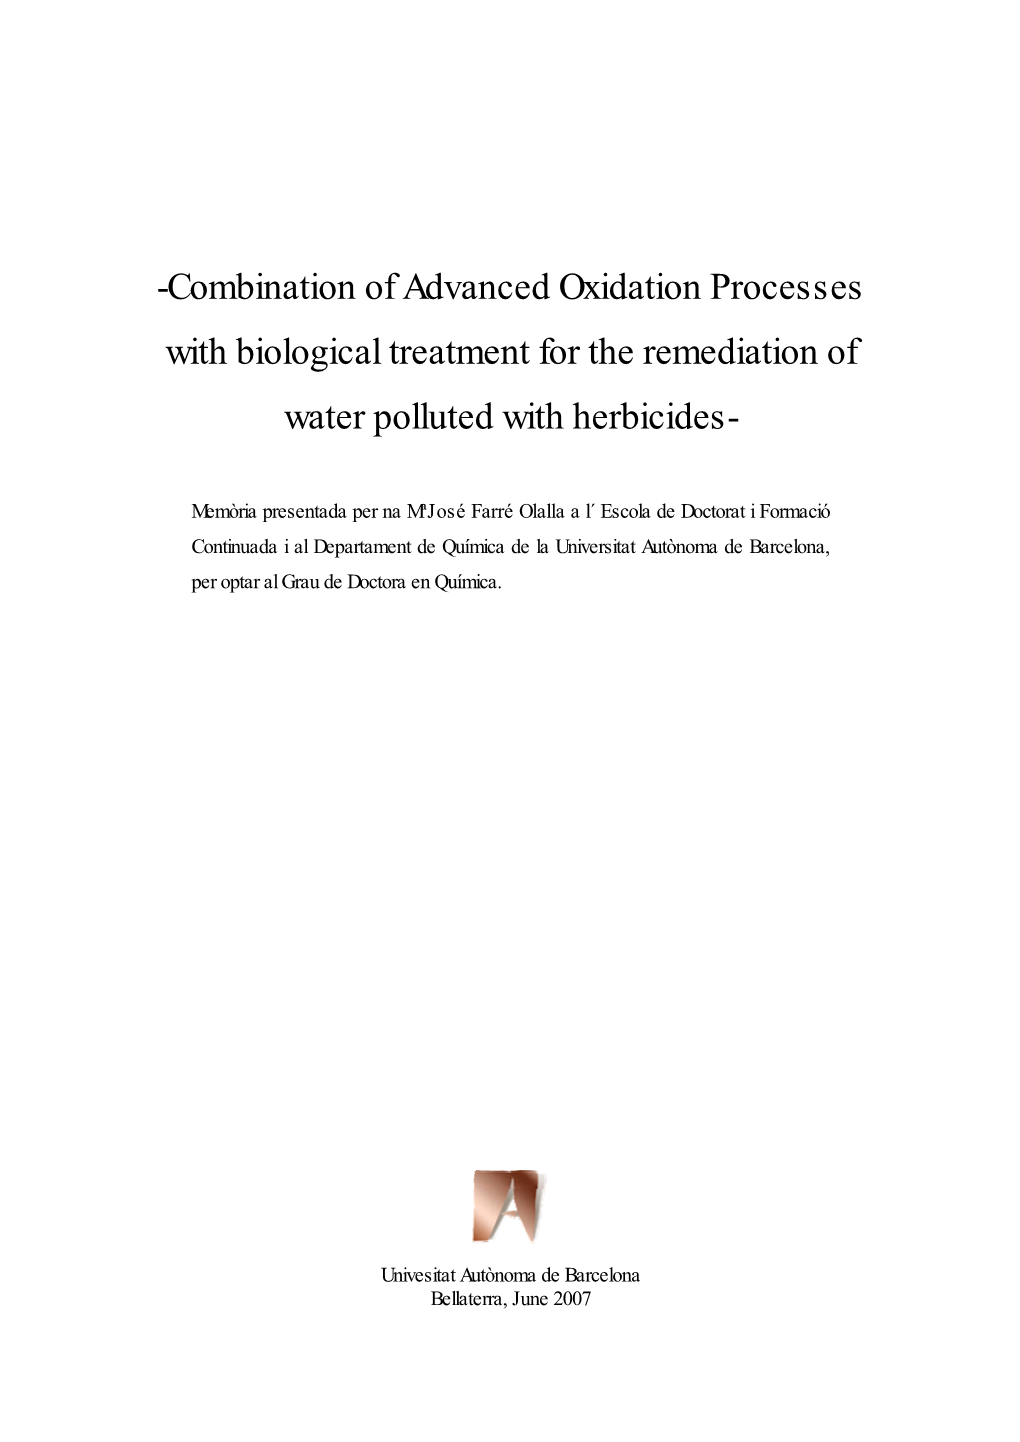 Combination of Advanced Oxidation Processes with Biological Treatment